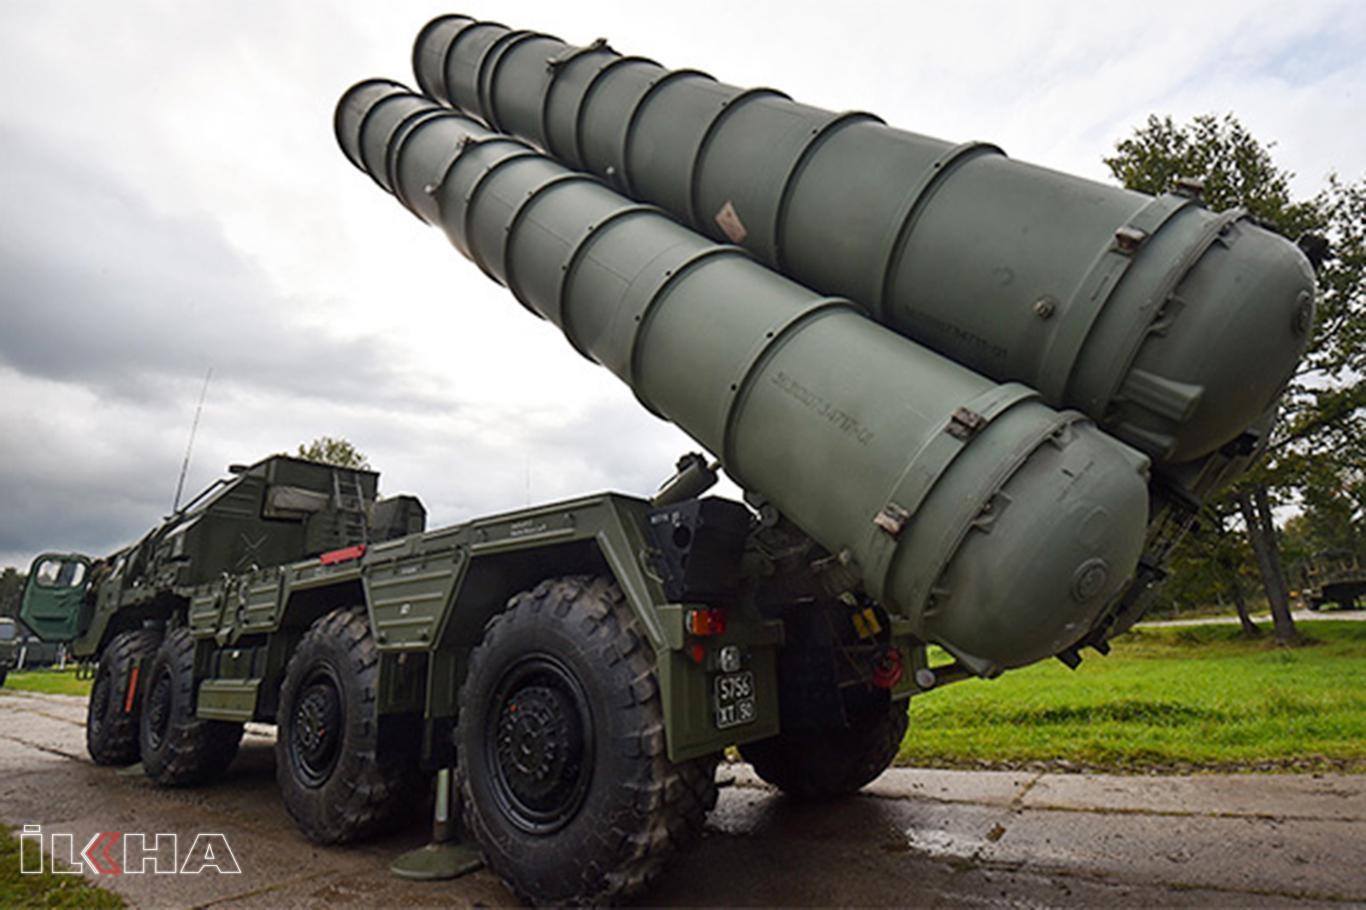 S-400s to be installed in December in Turkey